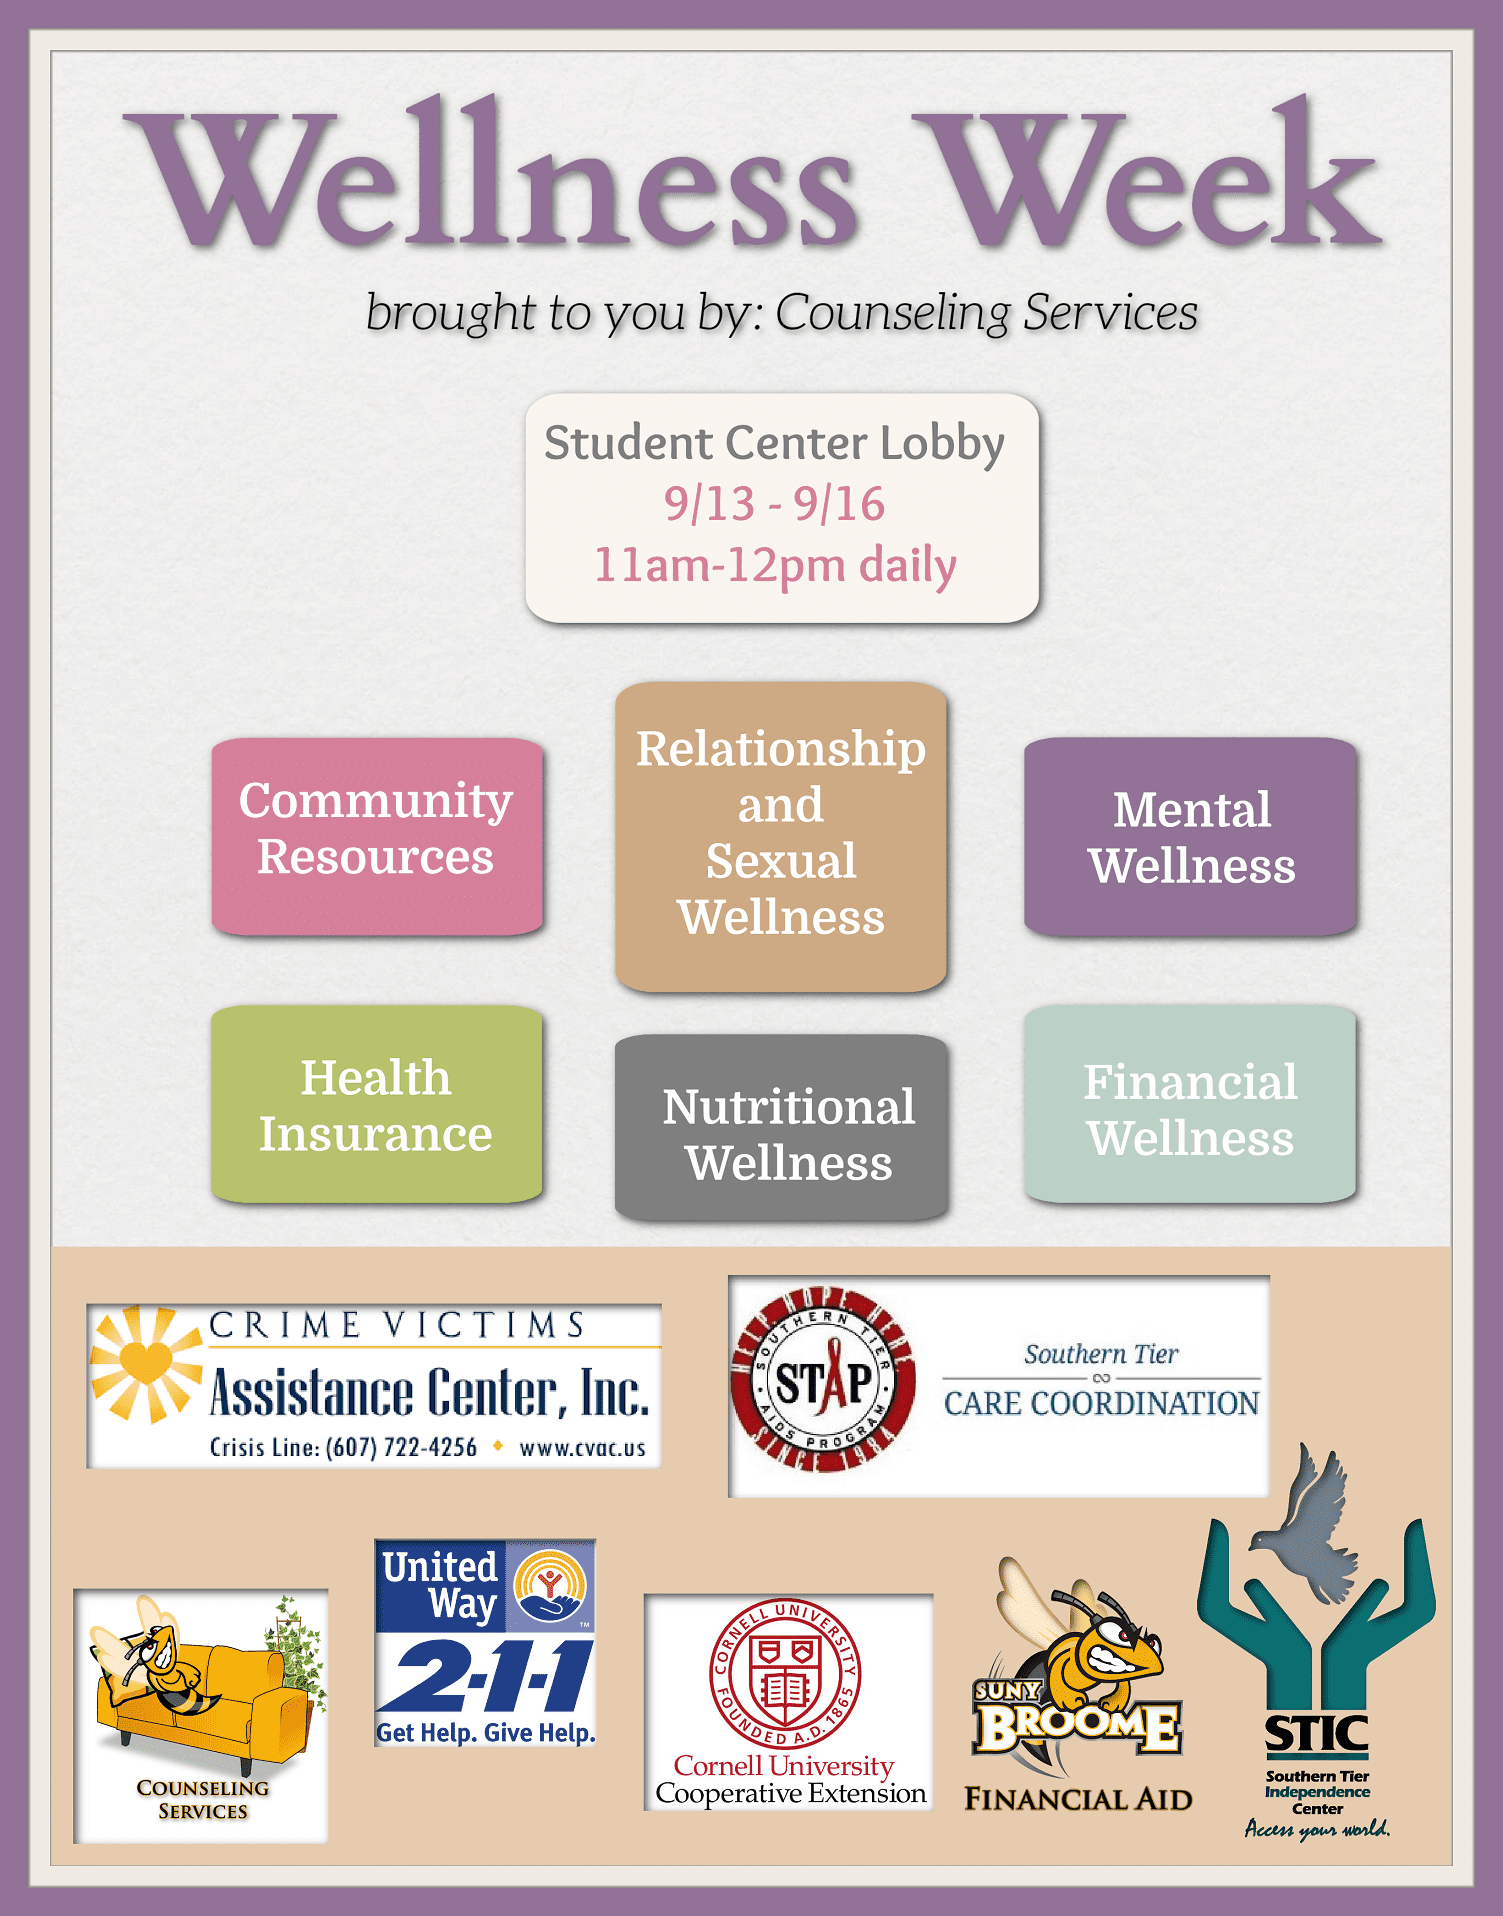 Wellness Week brought to you by Counseling Services in the Student Center Lobby September 13 through September 16 at 11:00 am to Noon daily.